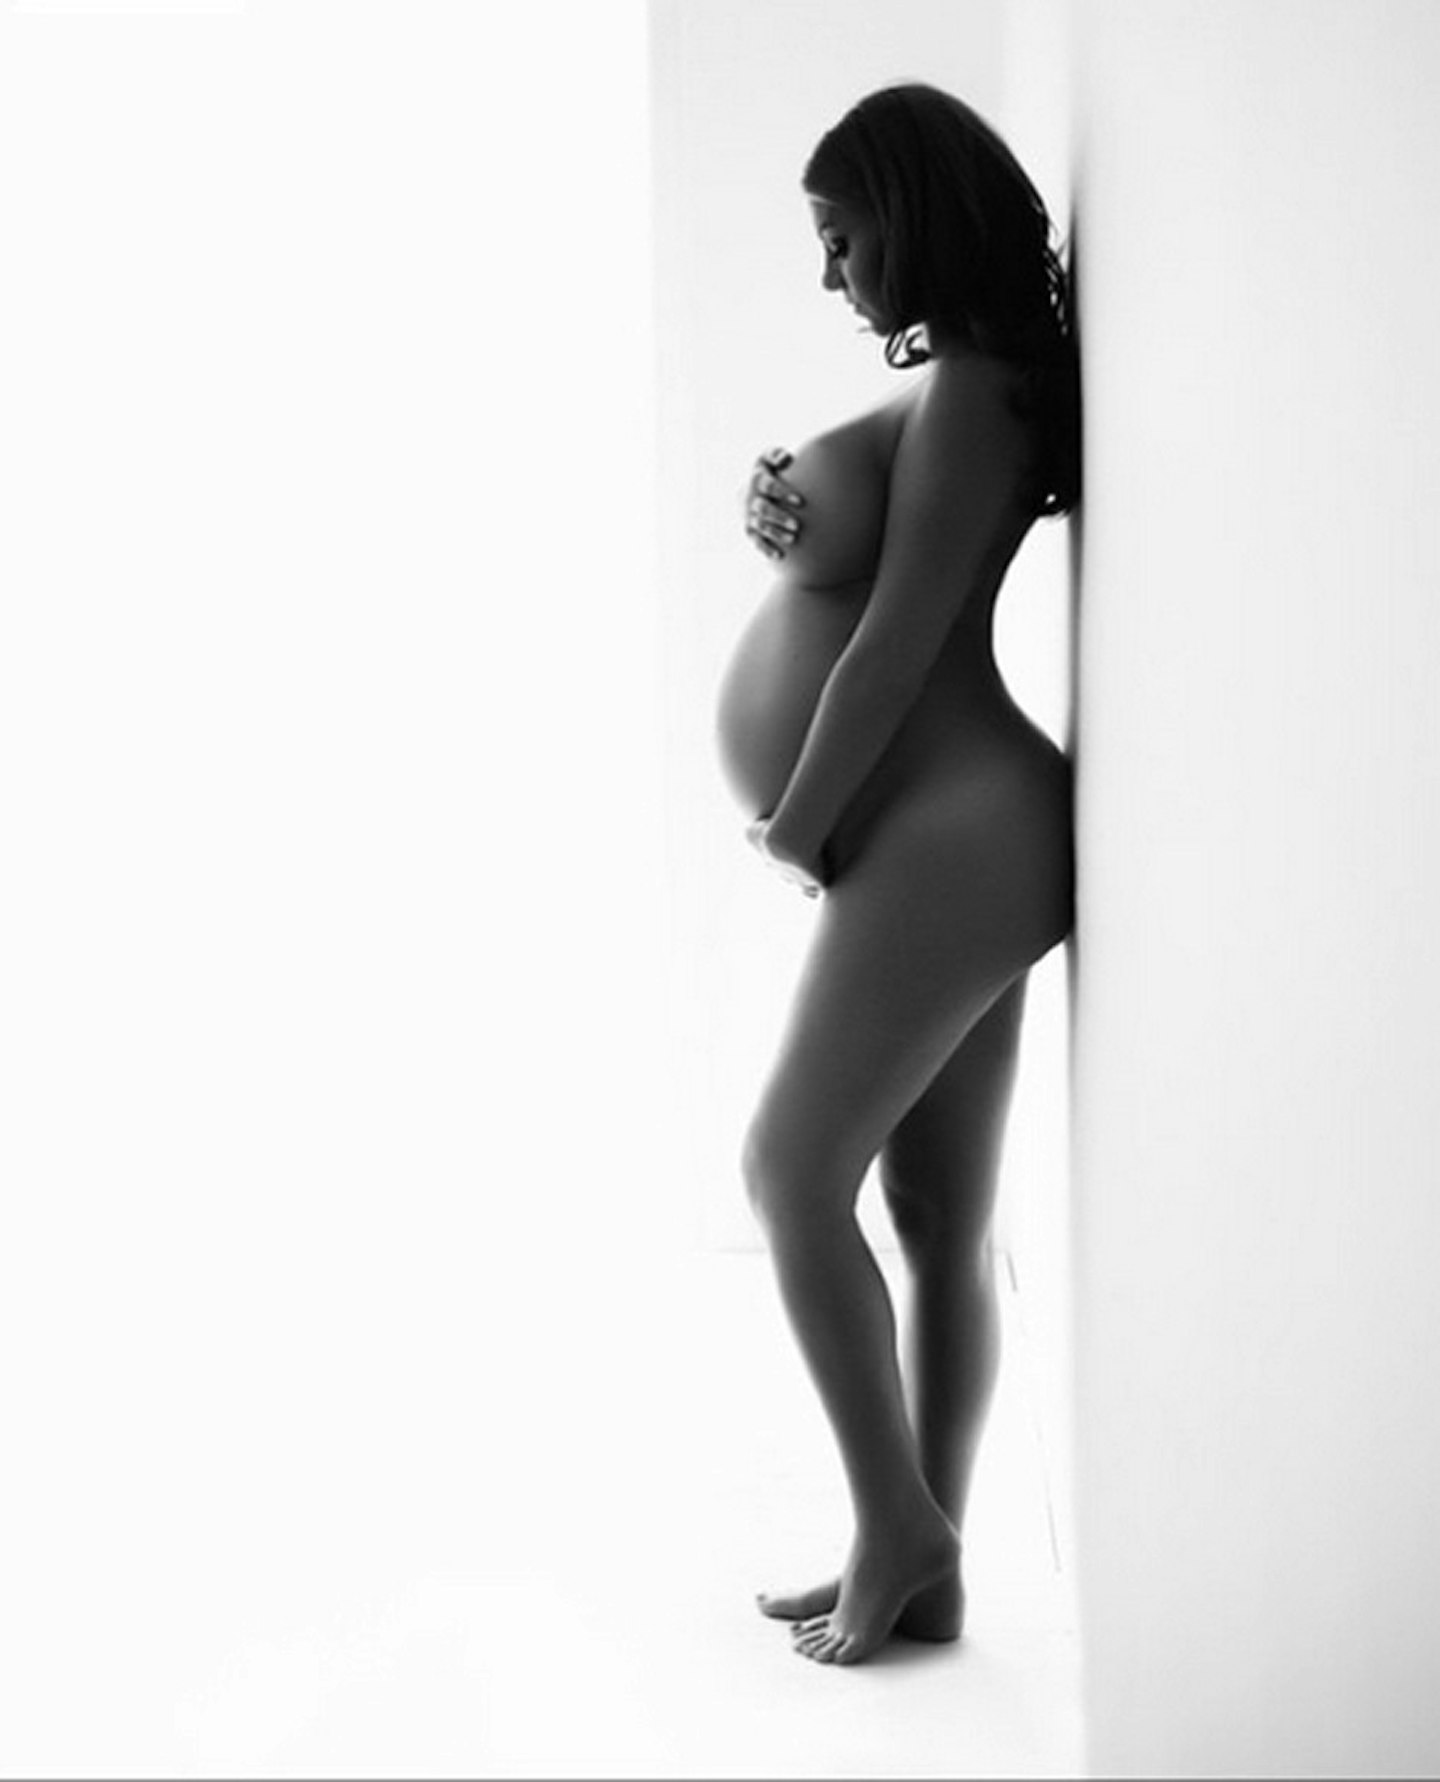 @billimucklow: "Thank You Maria Murray For My Pregnancy Photos □ Loved Shooting With You! Embracing The Changes To My Body. #MyBody #MyLife #MyBabyBoy"